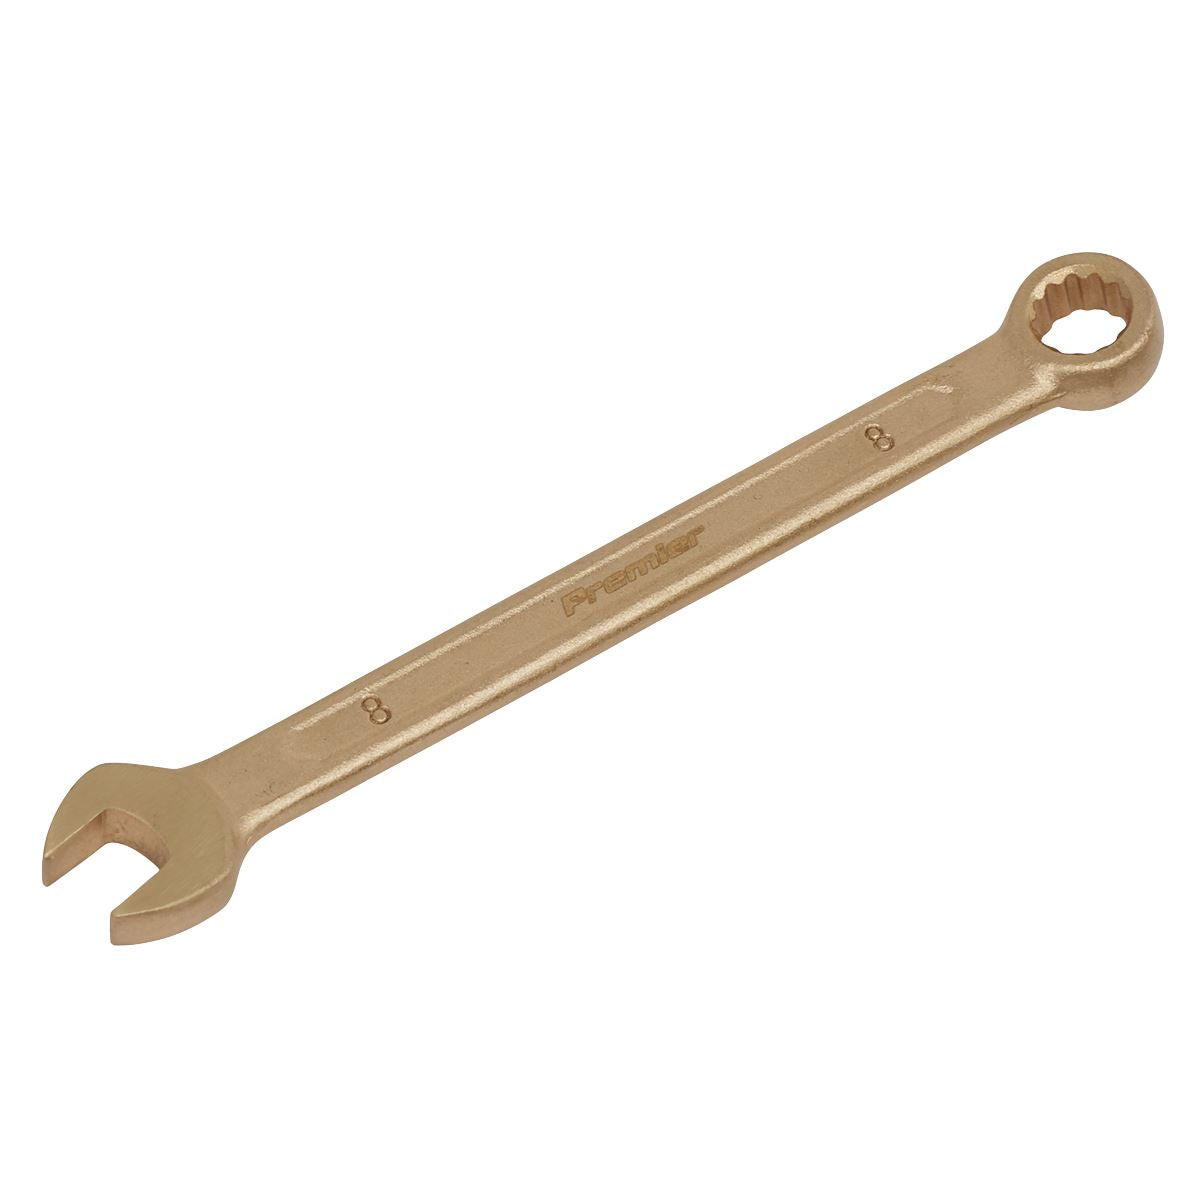 Sealey Premier Combination Spanner 8mm - Non-Sparking